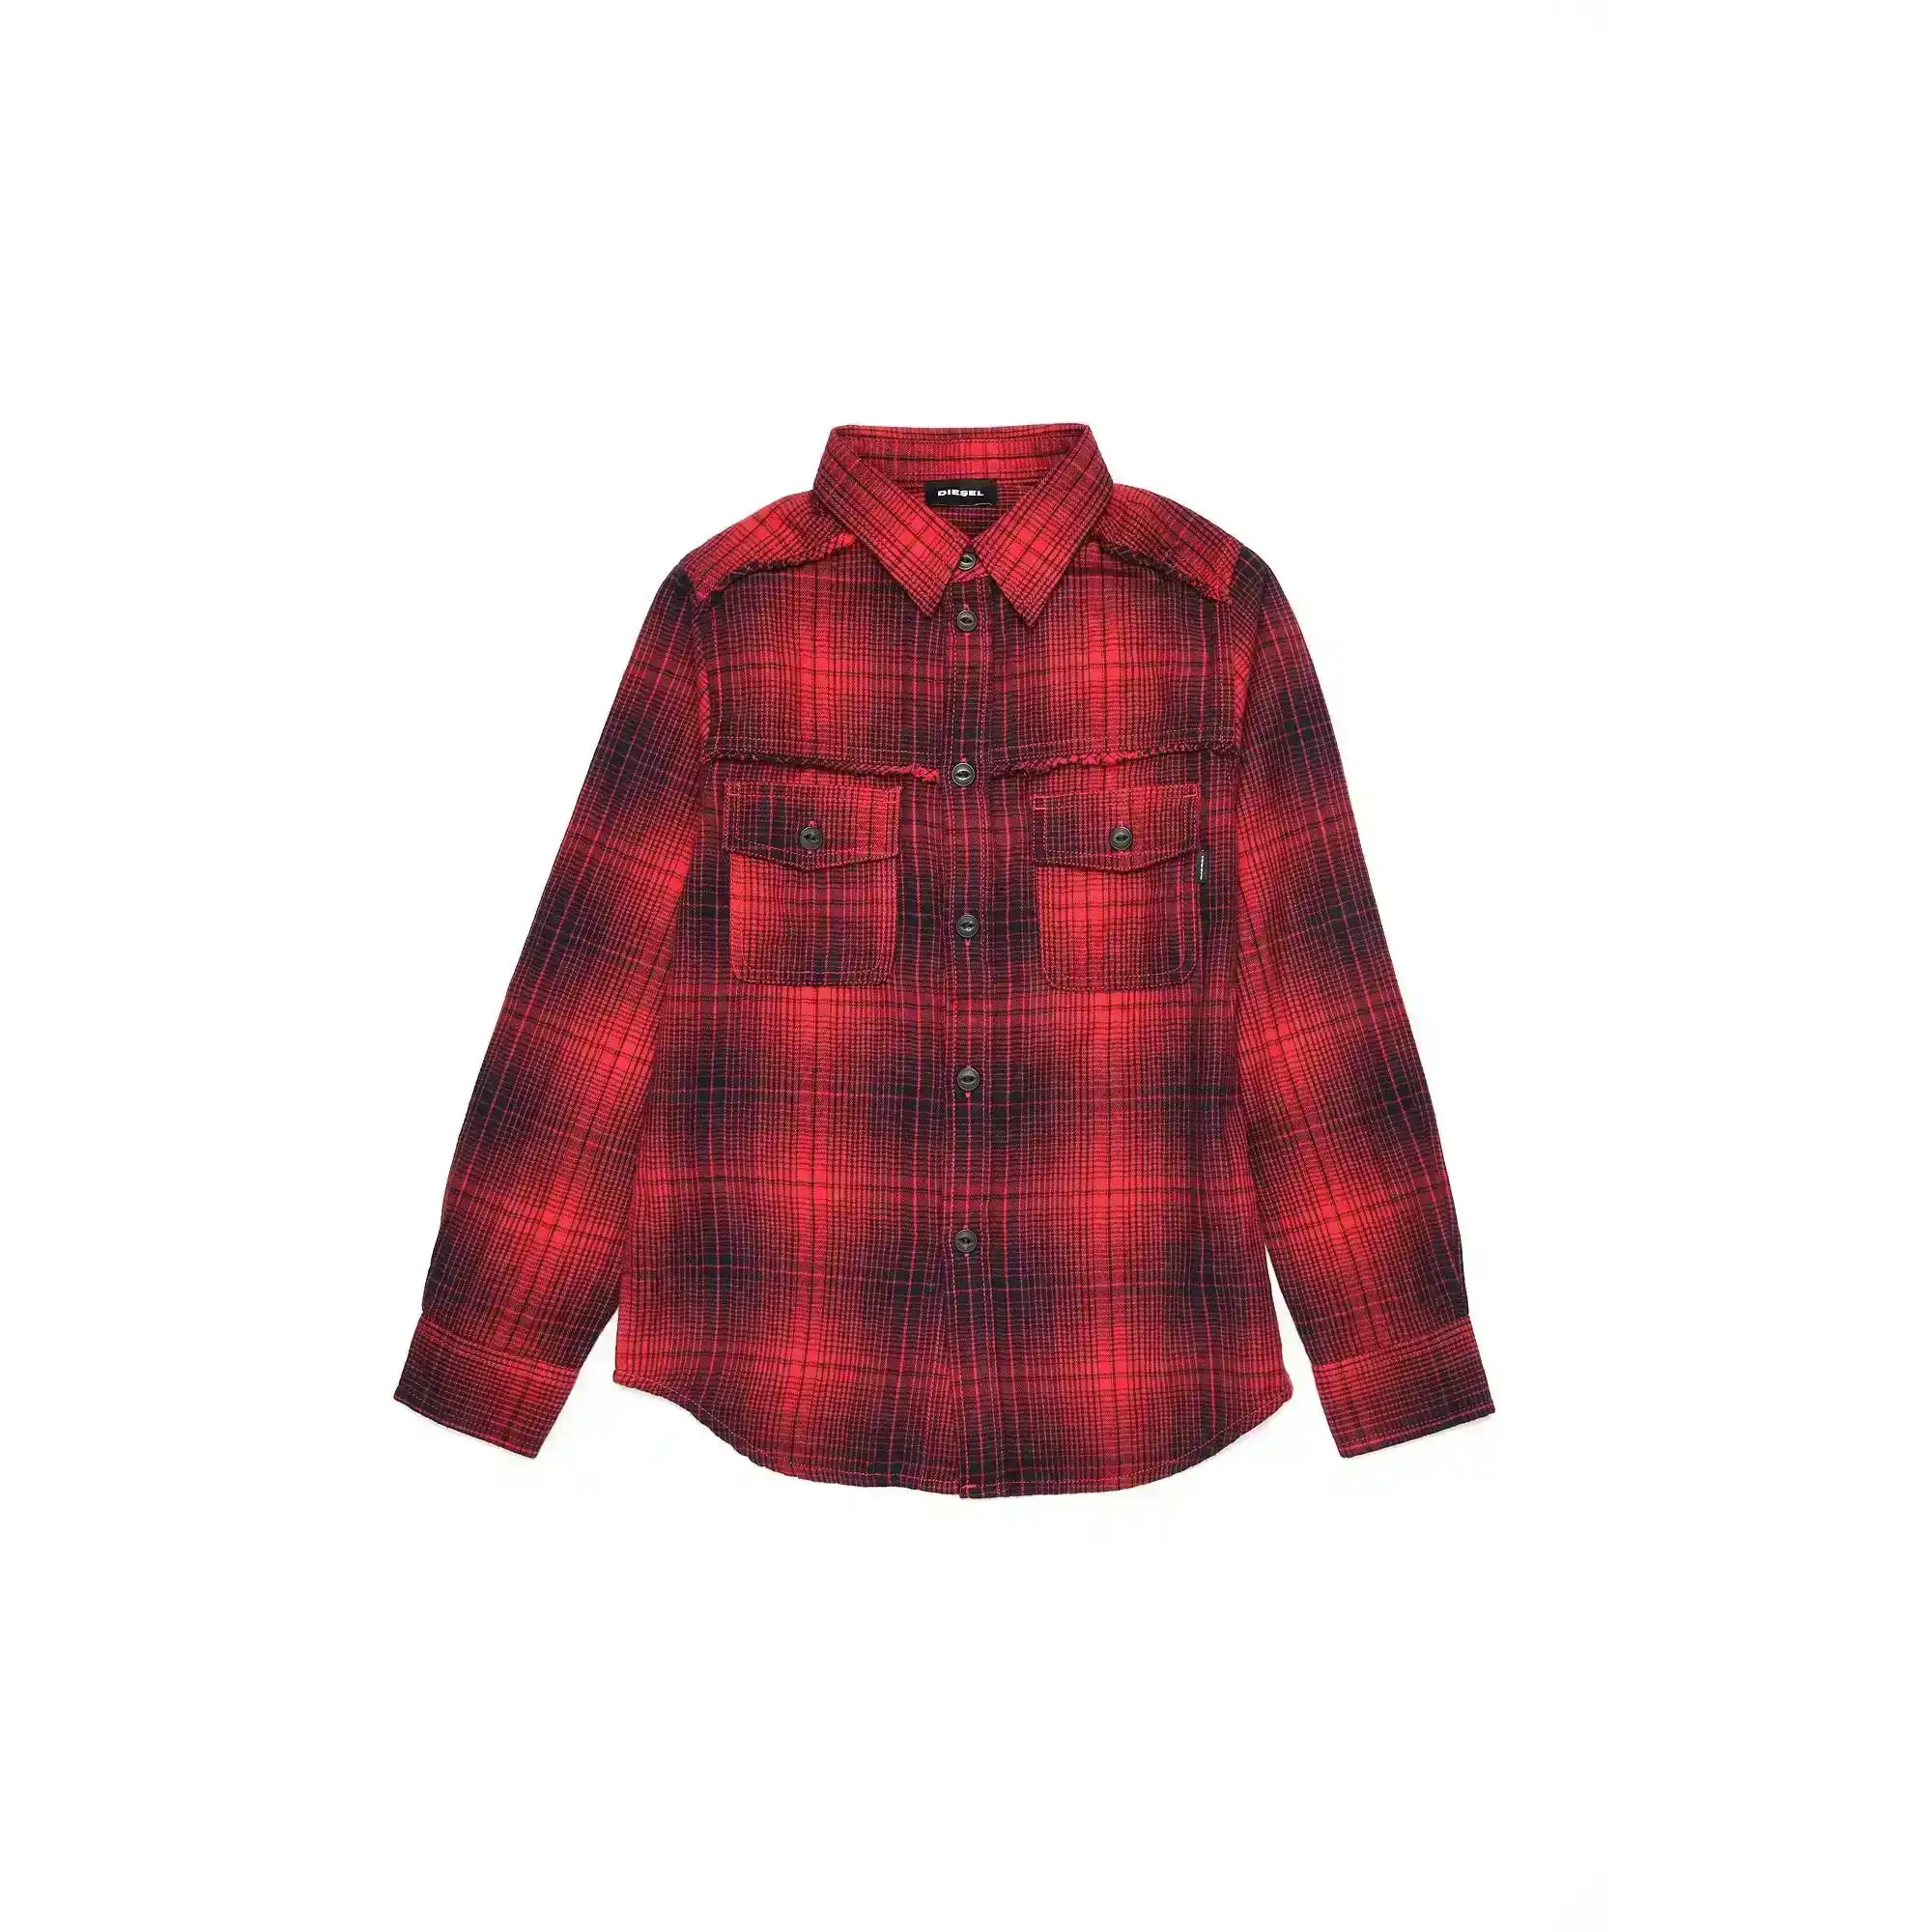 Diesel Boys Check Button Up Shirt with Collar